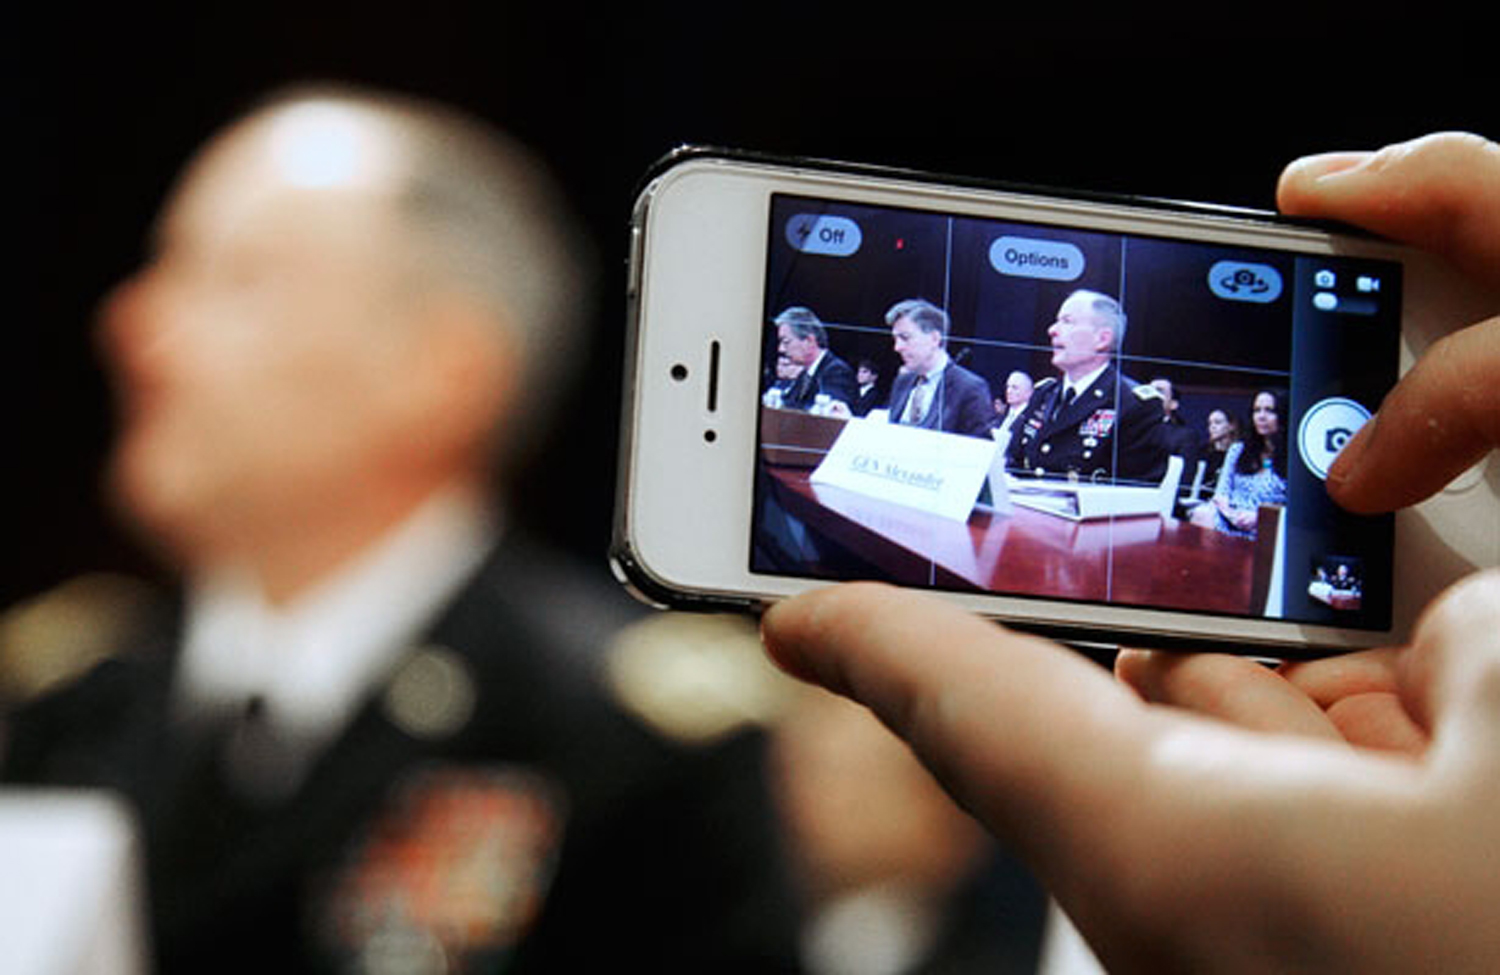 Tell Congress: We Must Rein in the NSA